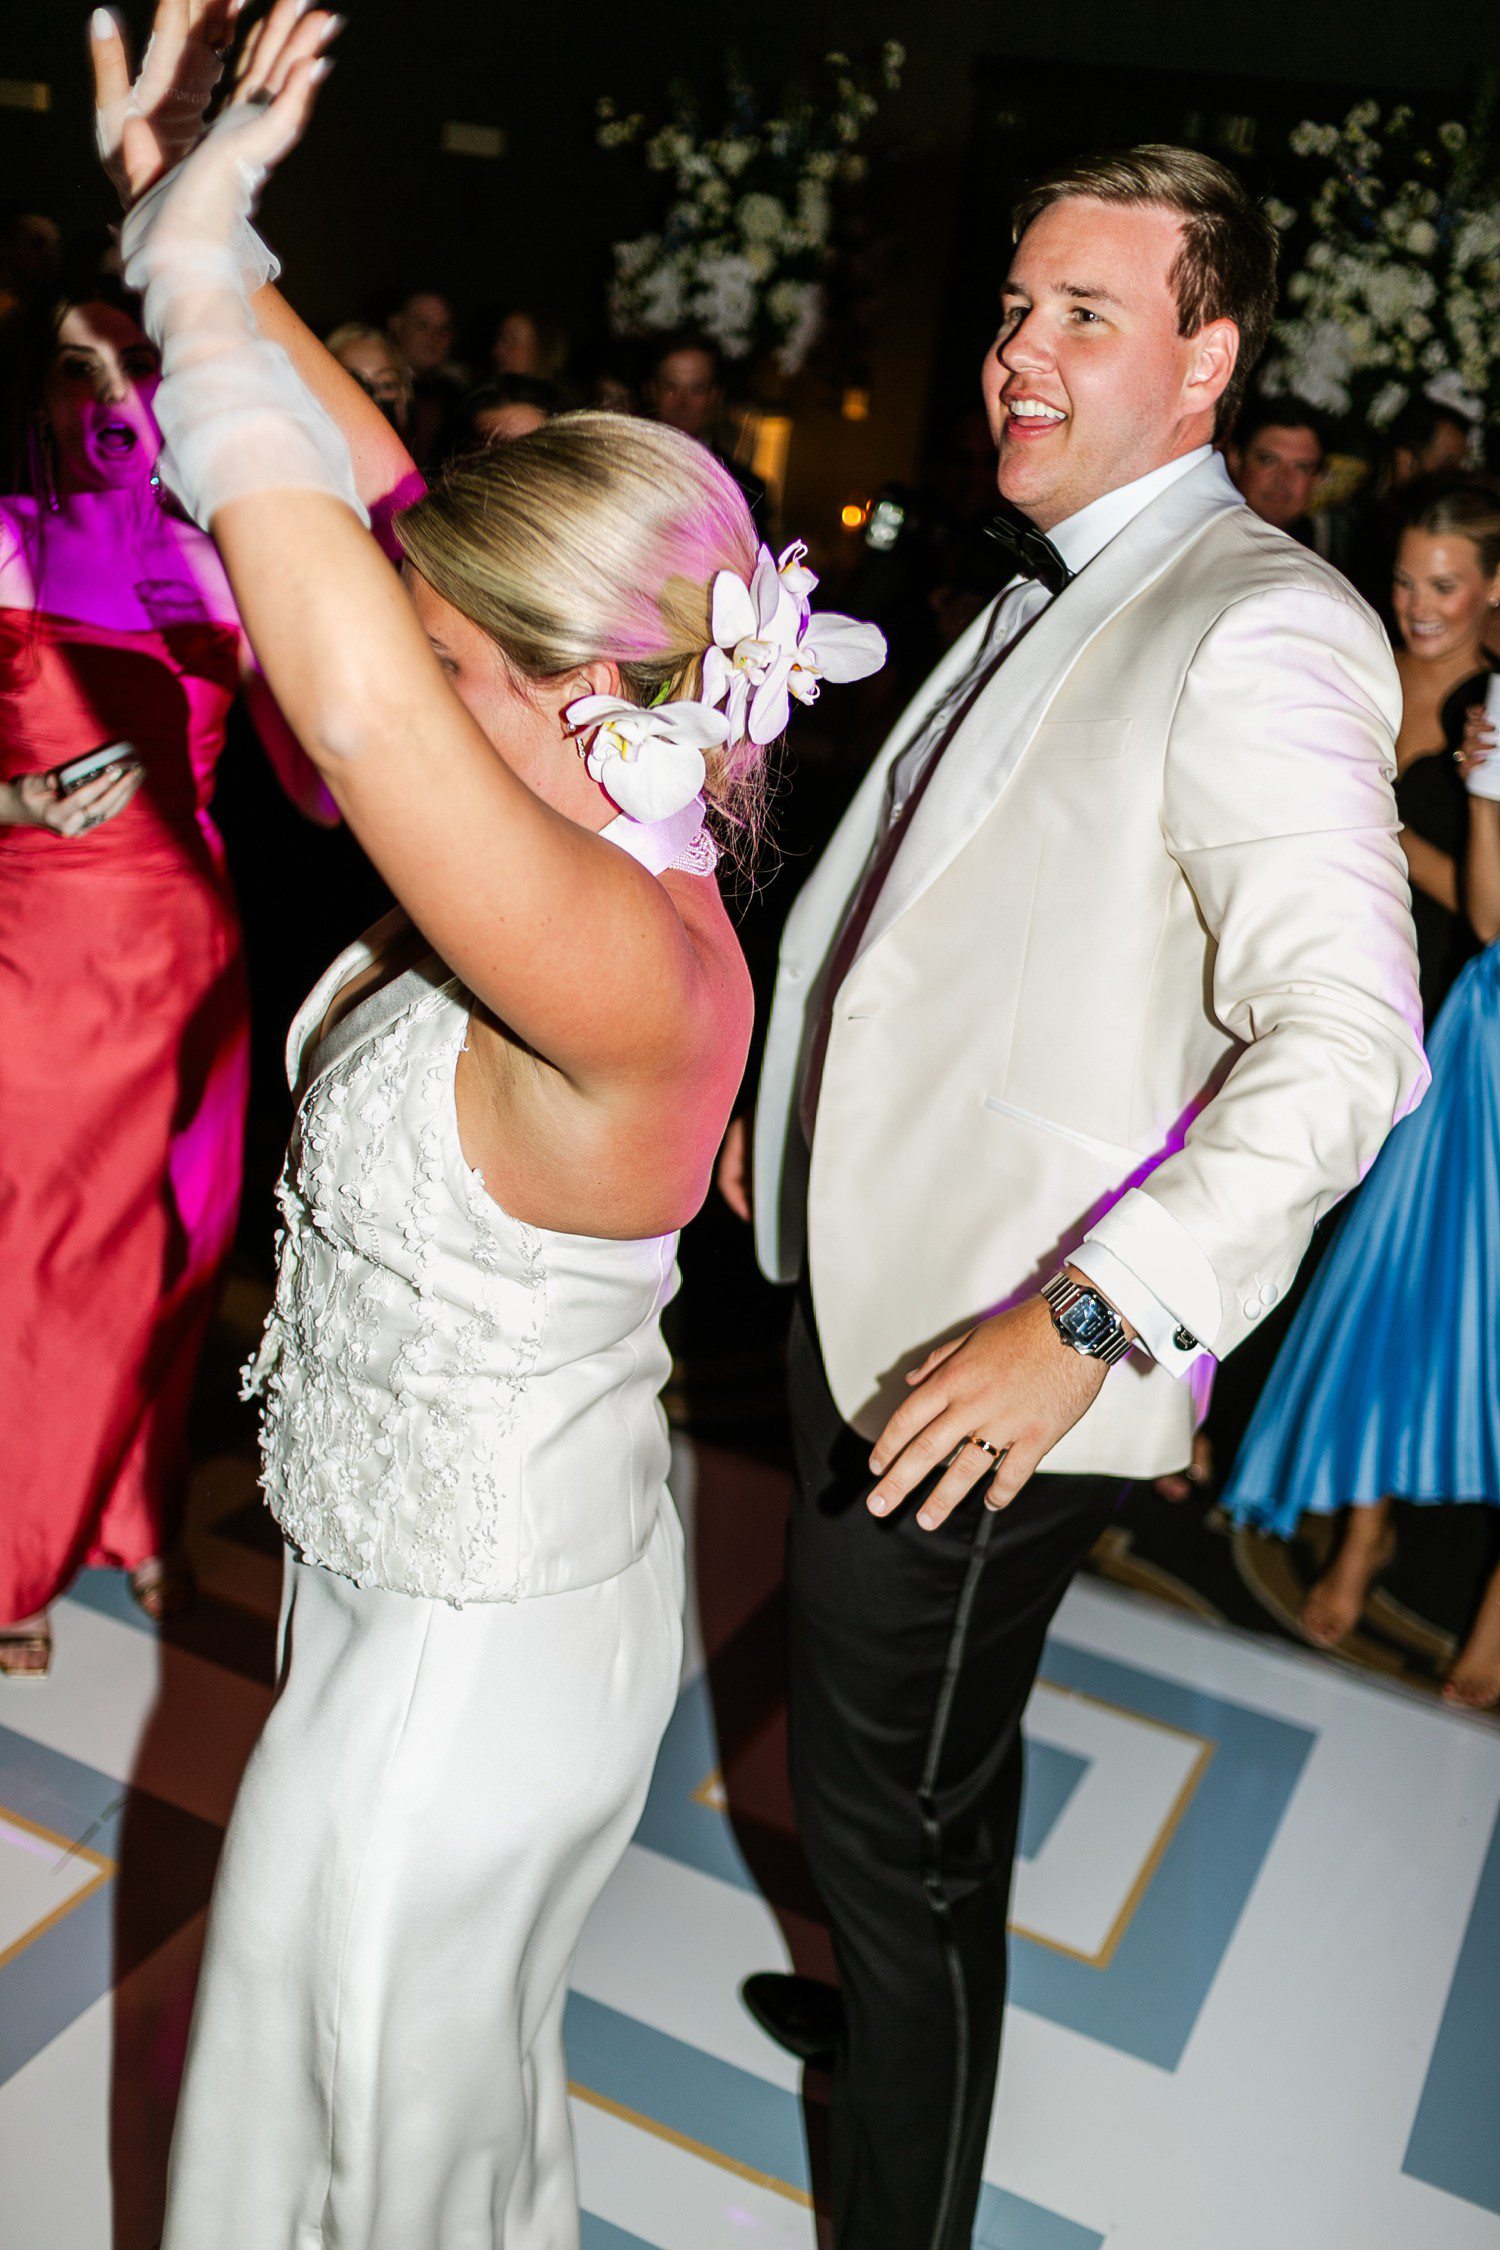 Bride and groom dancing during wedding reception at Austin Country Club.